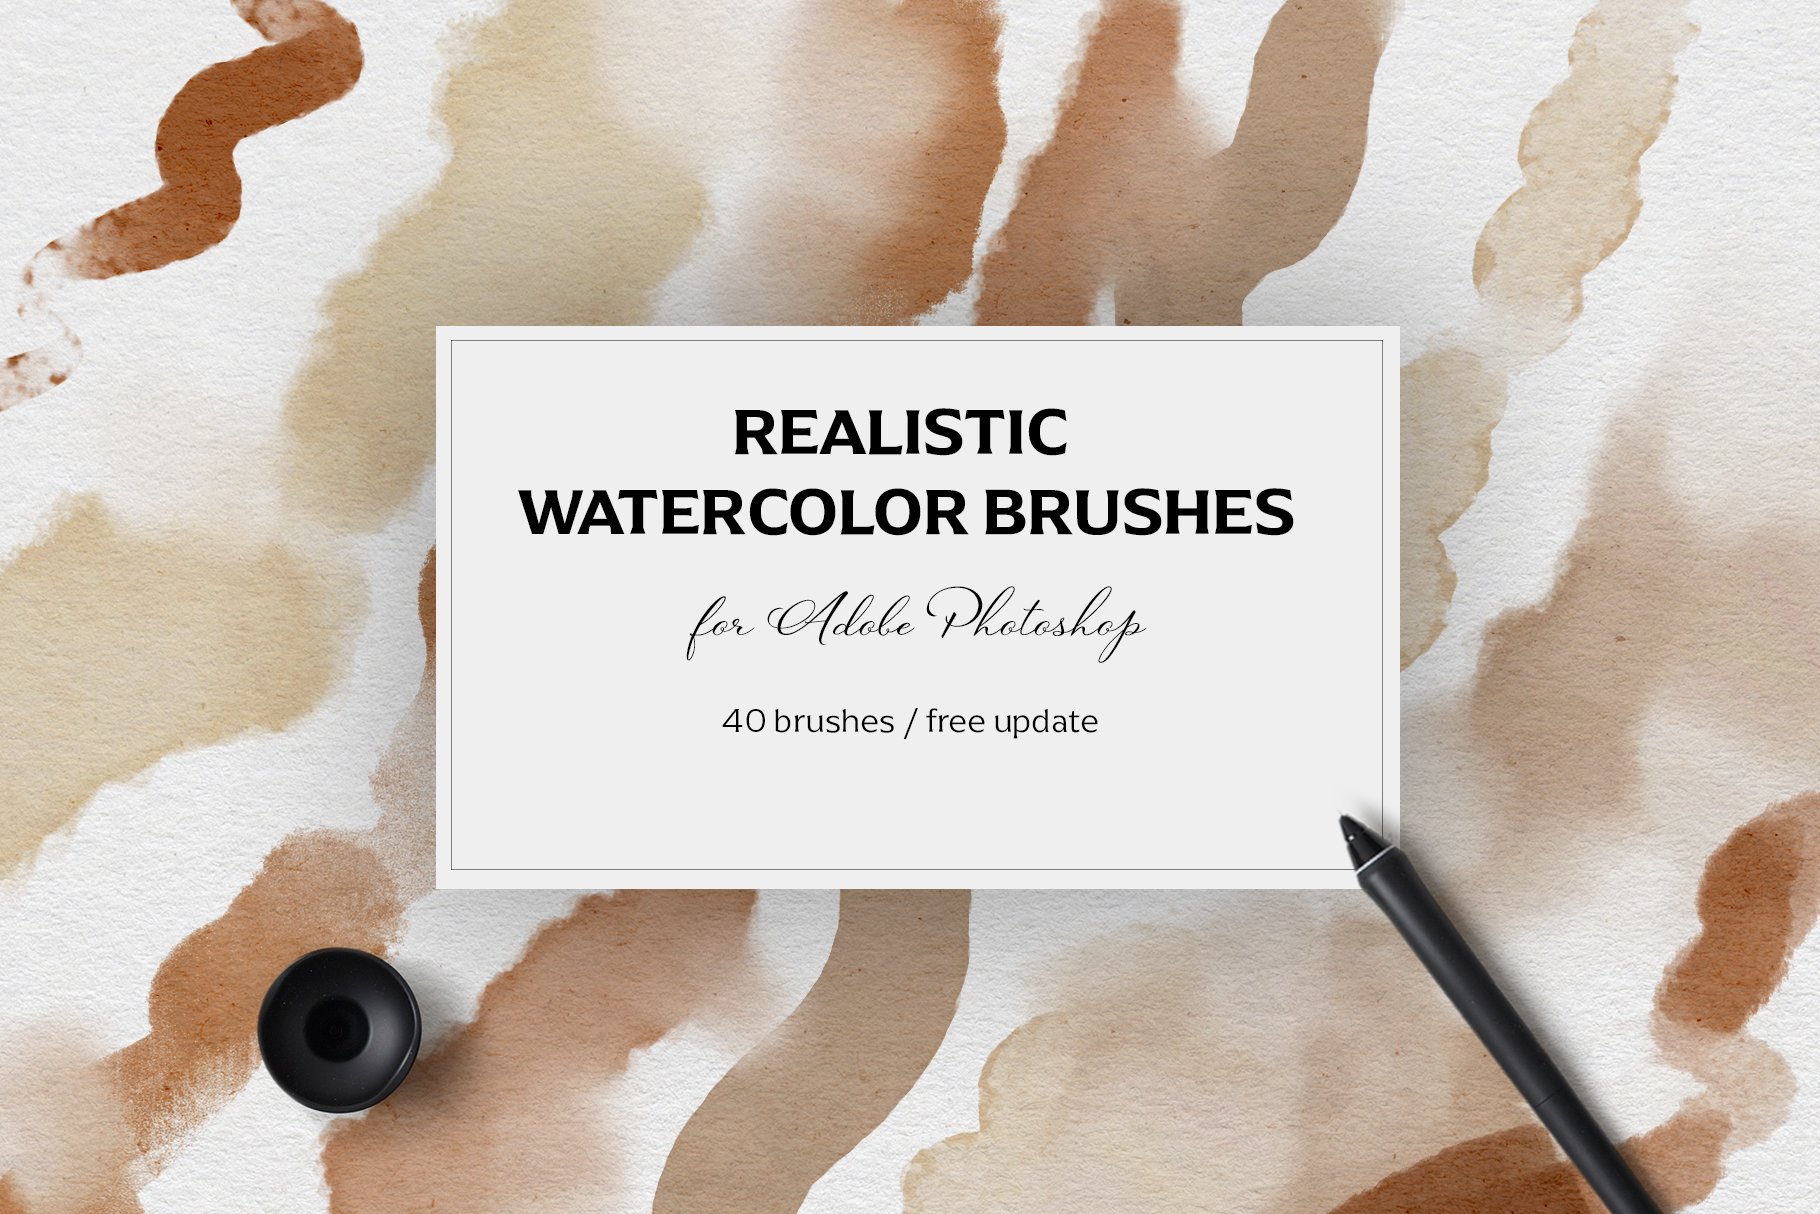 Realistic watercolor brushes - PScover image.